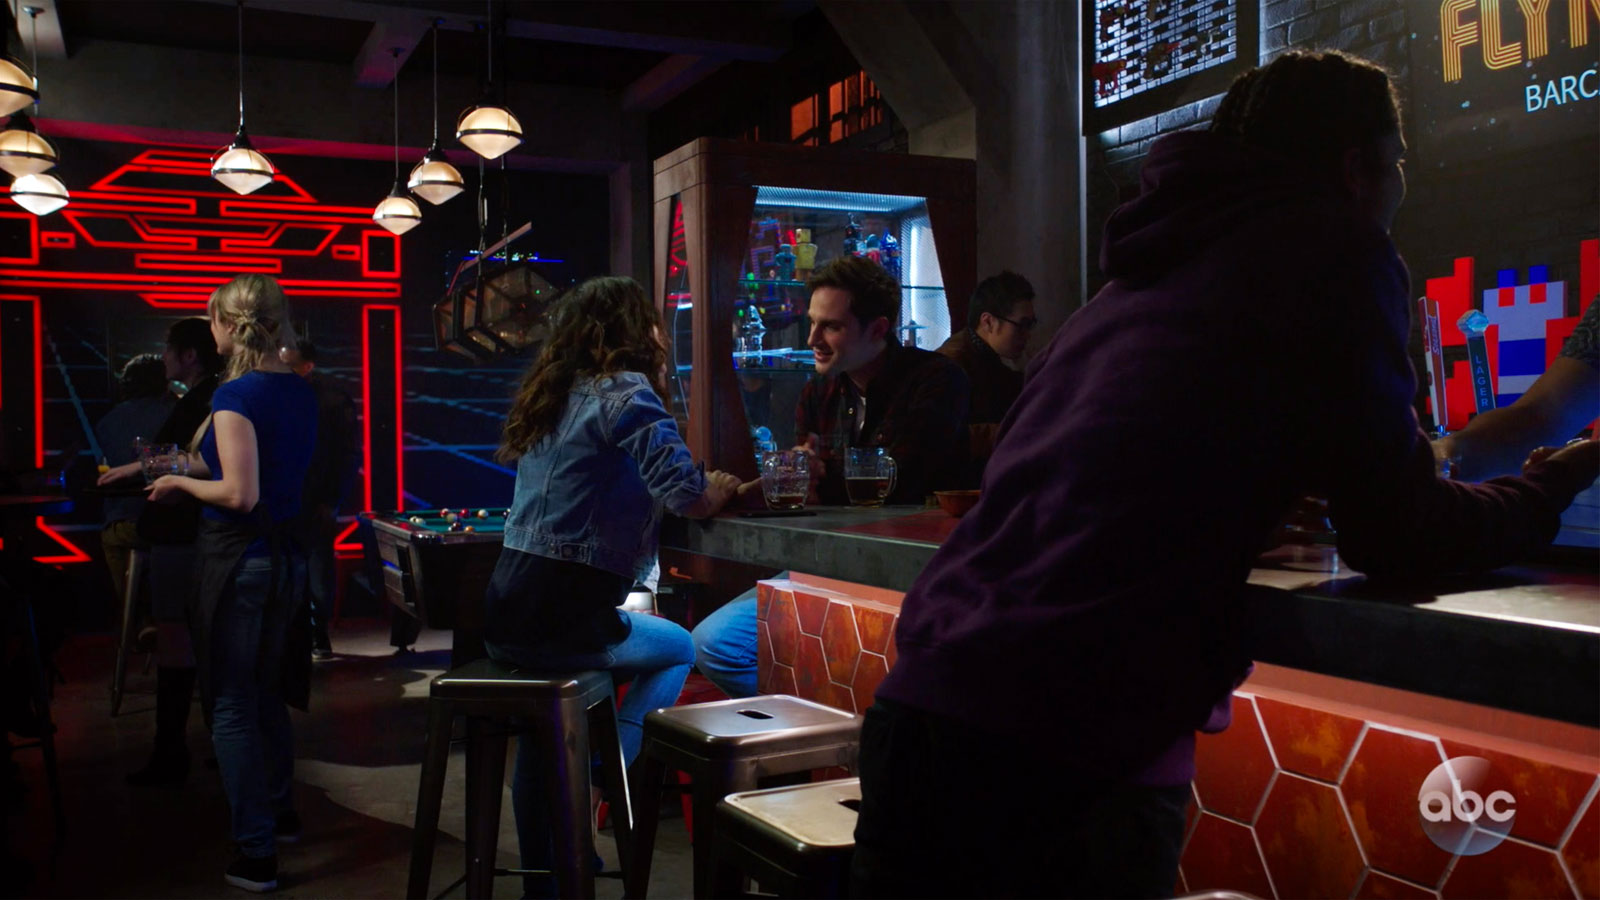 ONCE UPON A TIME: S7 - “FLYNN'S BARCADE” - SCREEN STILL